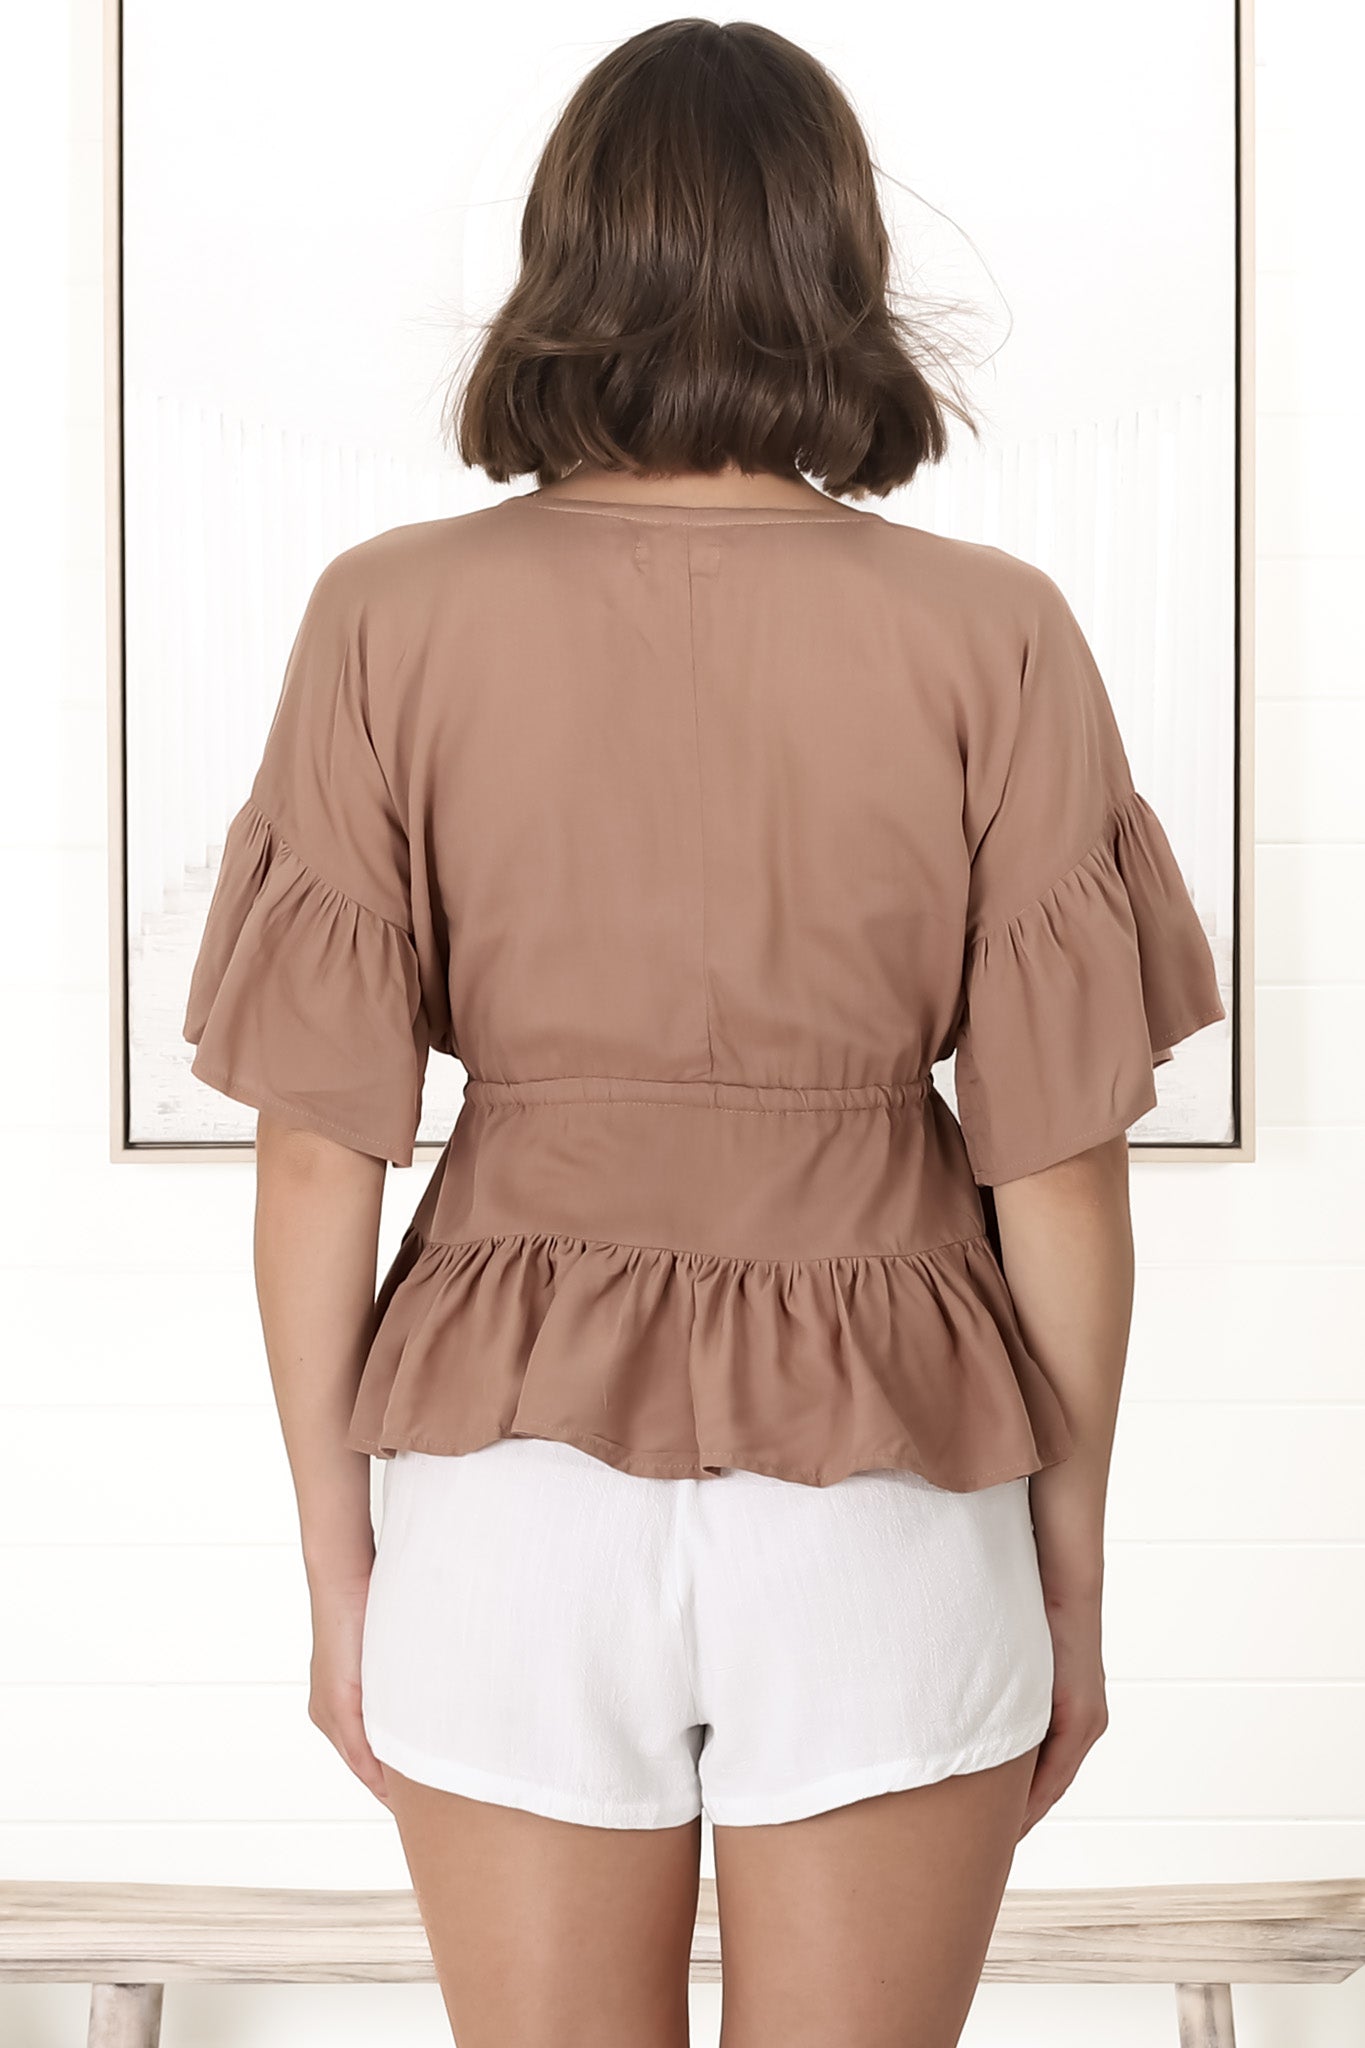 Celeste Top - Pull In Underbust Tiered Top with V Neckline in Camel